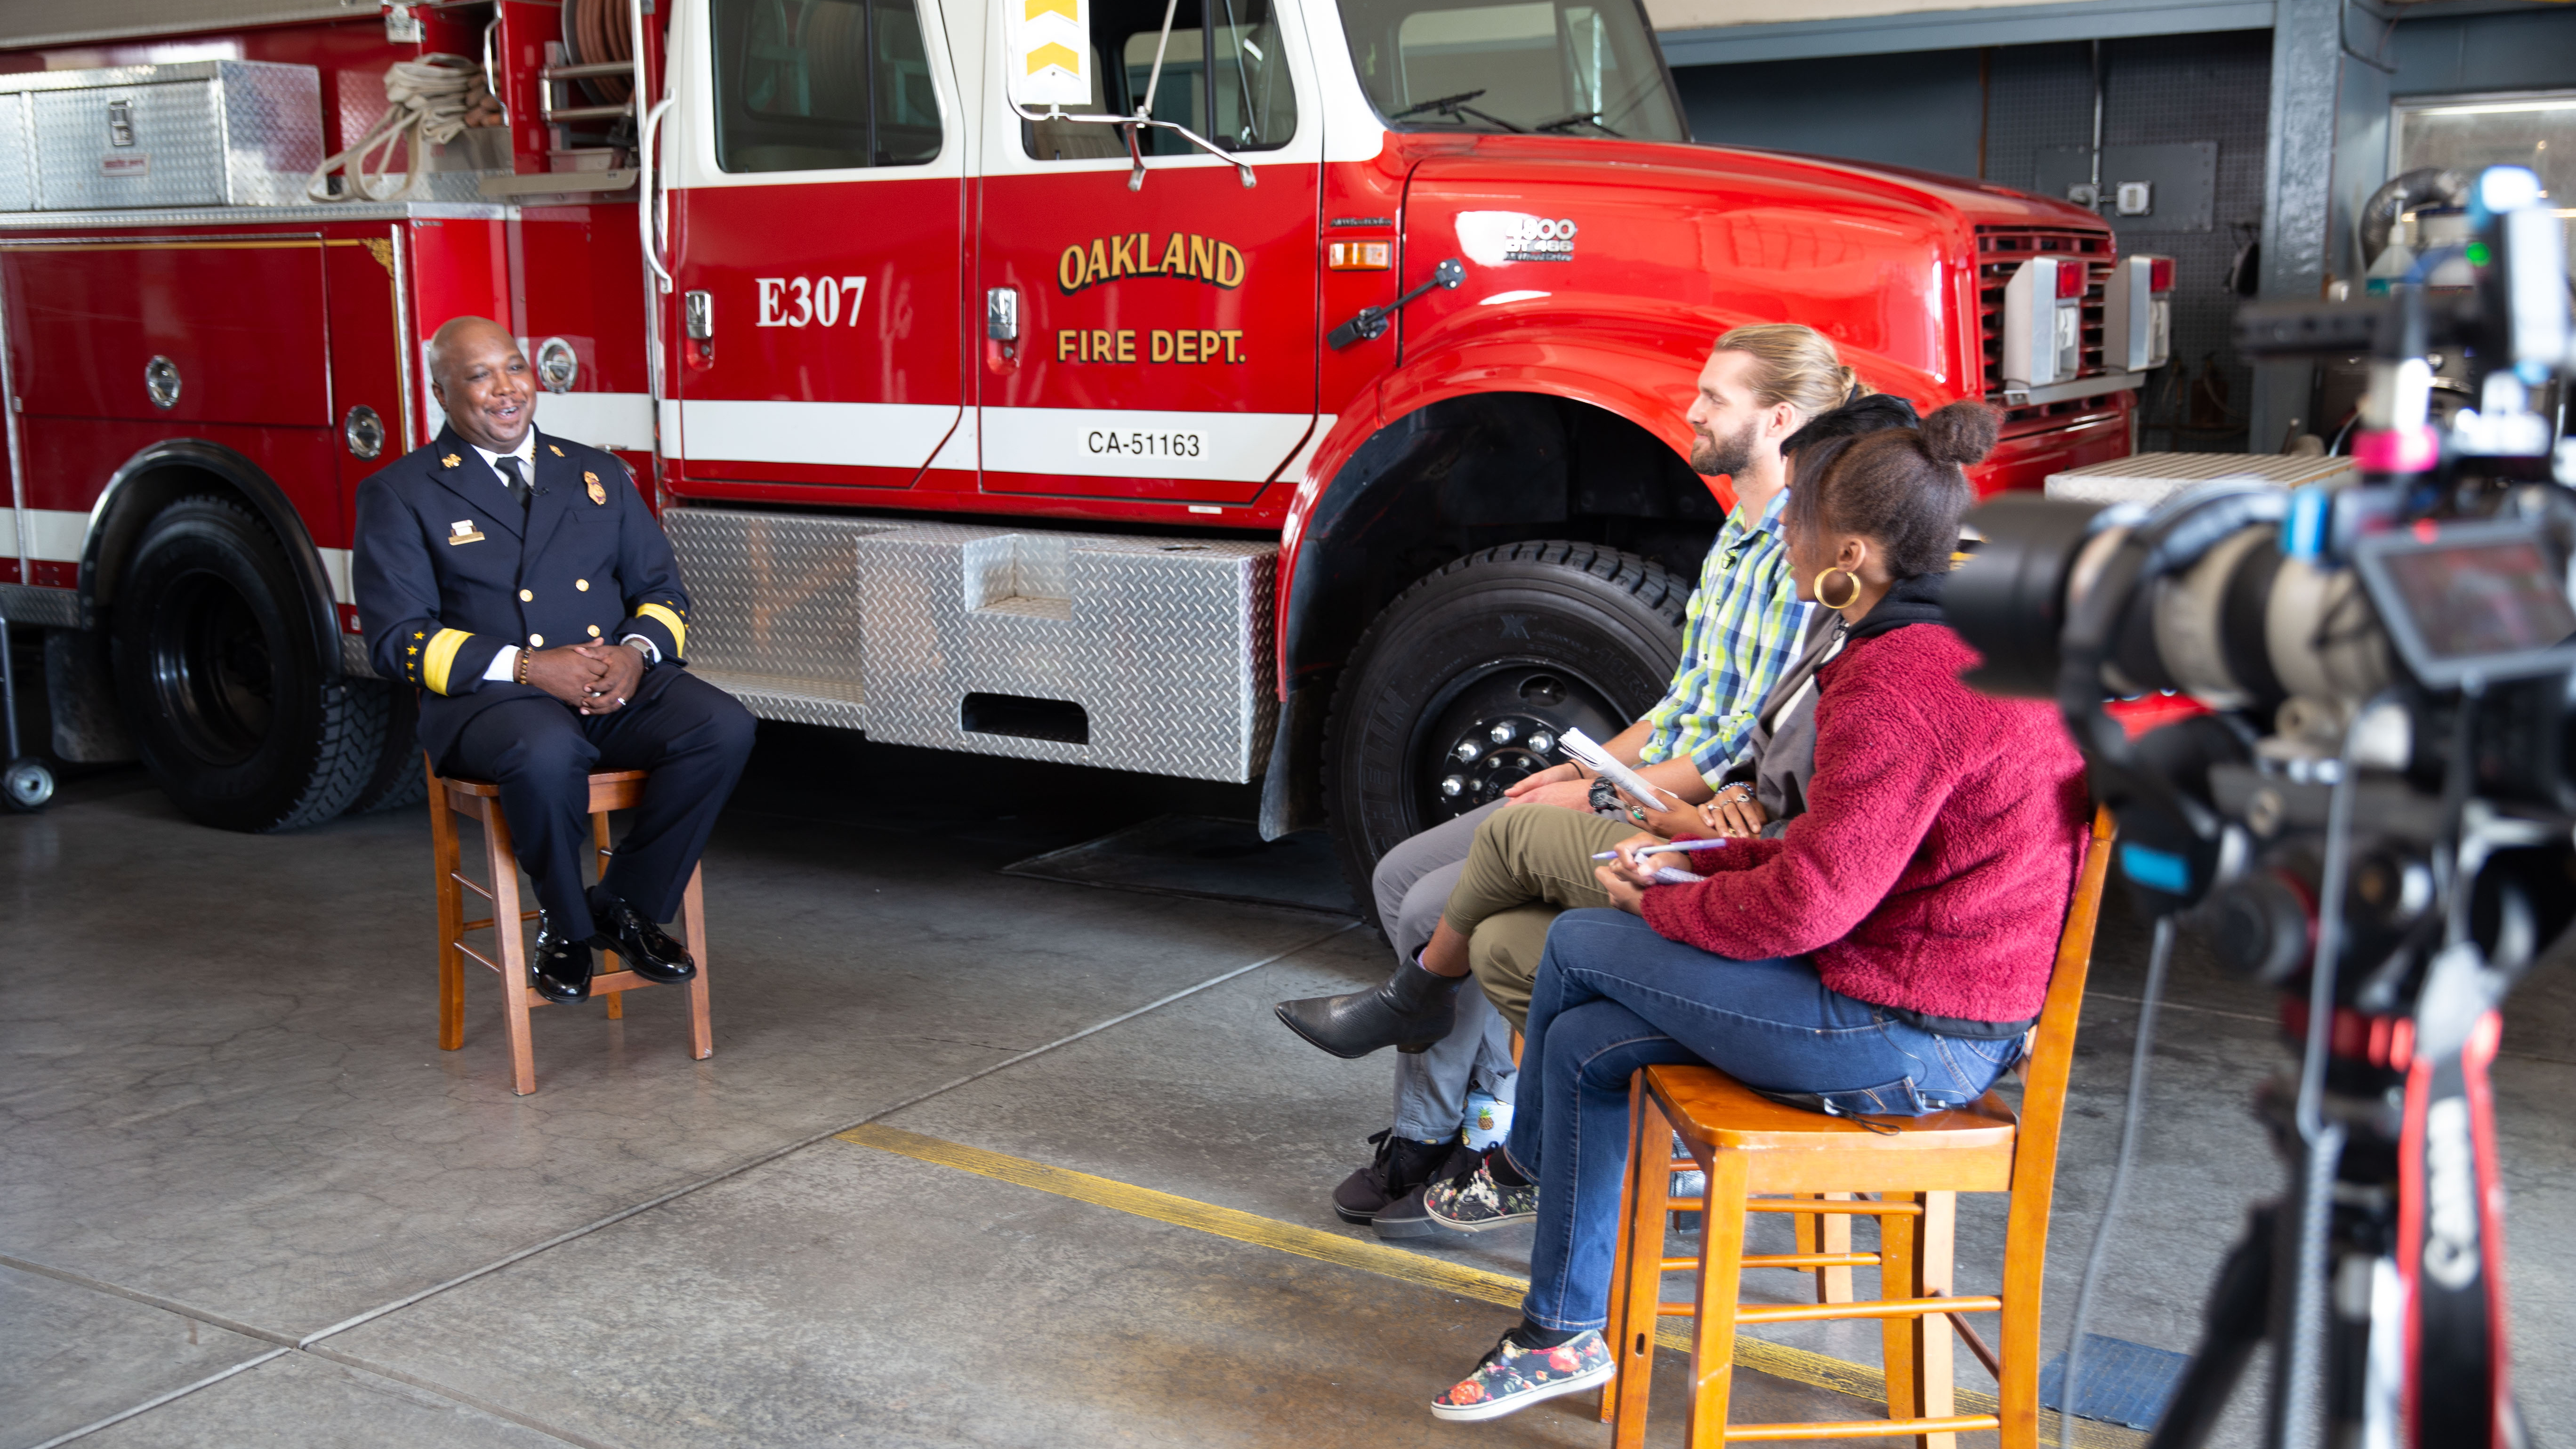 First from left, Oakland fire chief Reginald Freeman engages with the roadtrippers about how to find a personally fulfilling career that serves the public good.